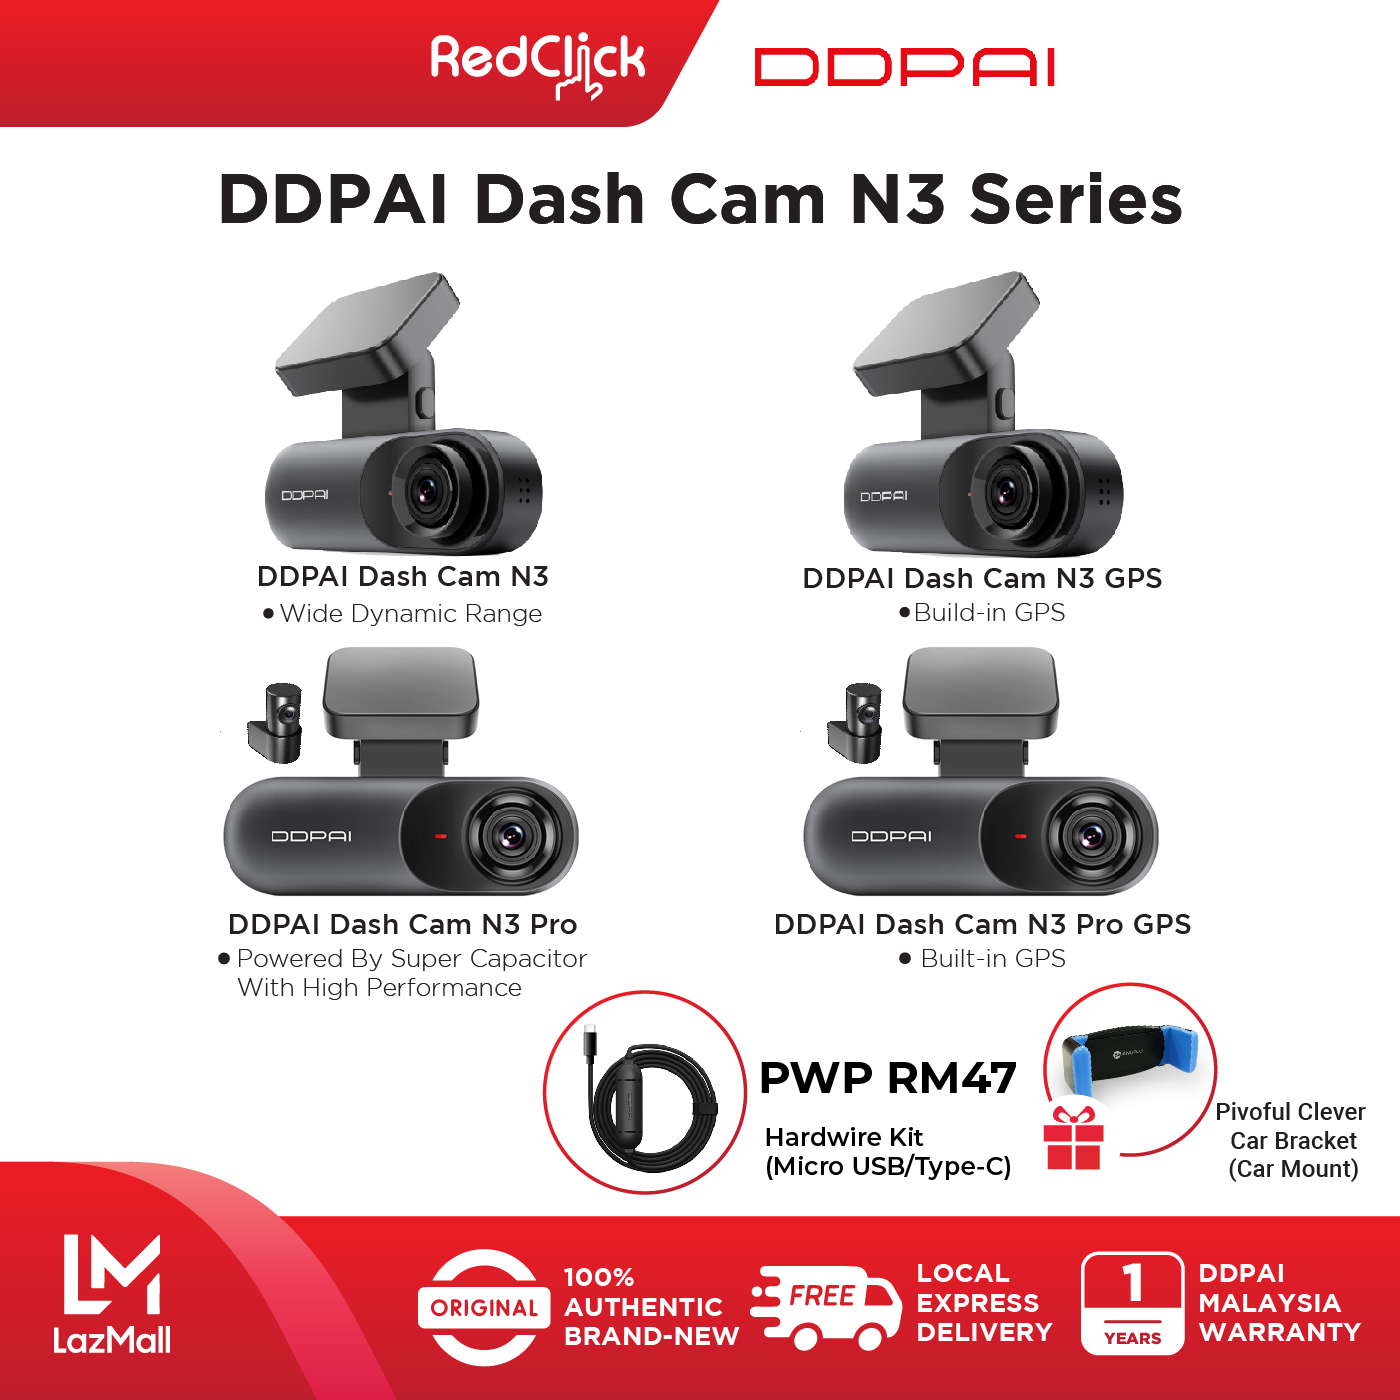 DDPAI Dash Cam Mola N3 / N3 GPS / N3 Pro Dual / N3 Pro GPS Dual 2K Ultra HD Resolution Infrared Night Vision Two-Fold Connector Cycle Recording Works With DDPAI App + Free Gift